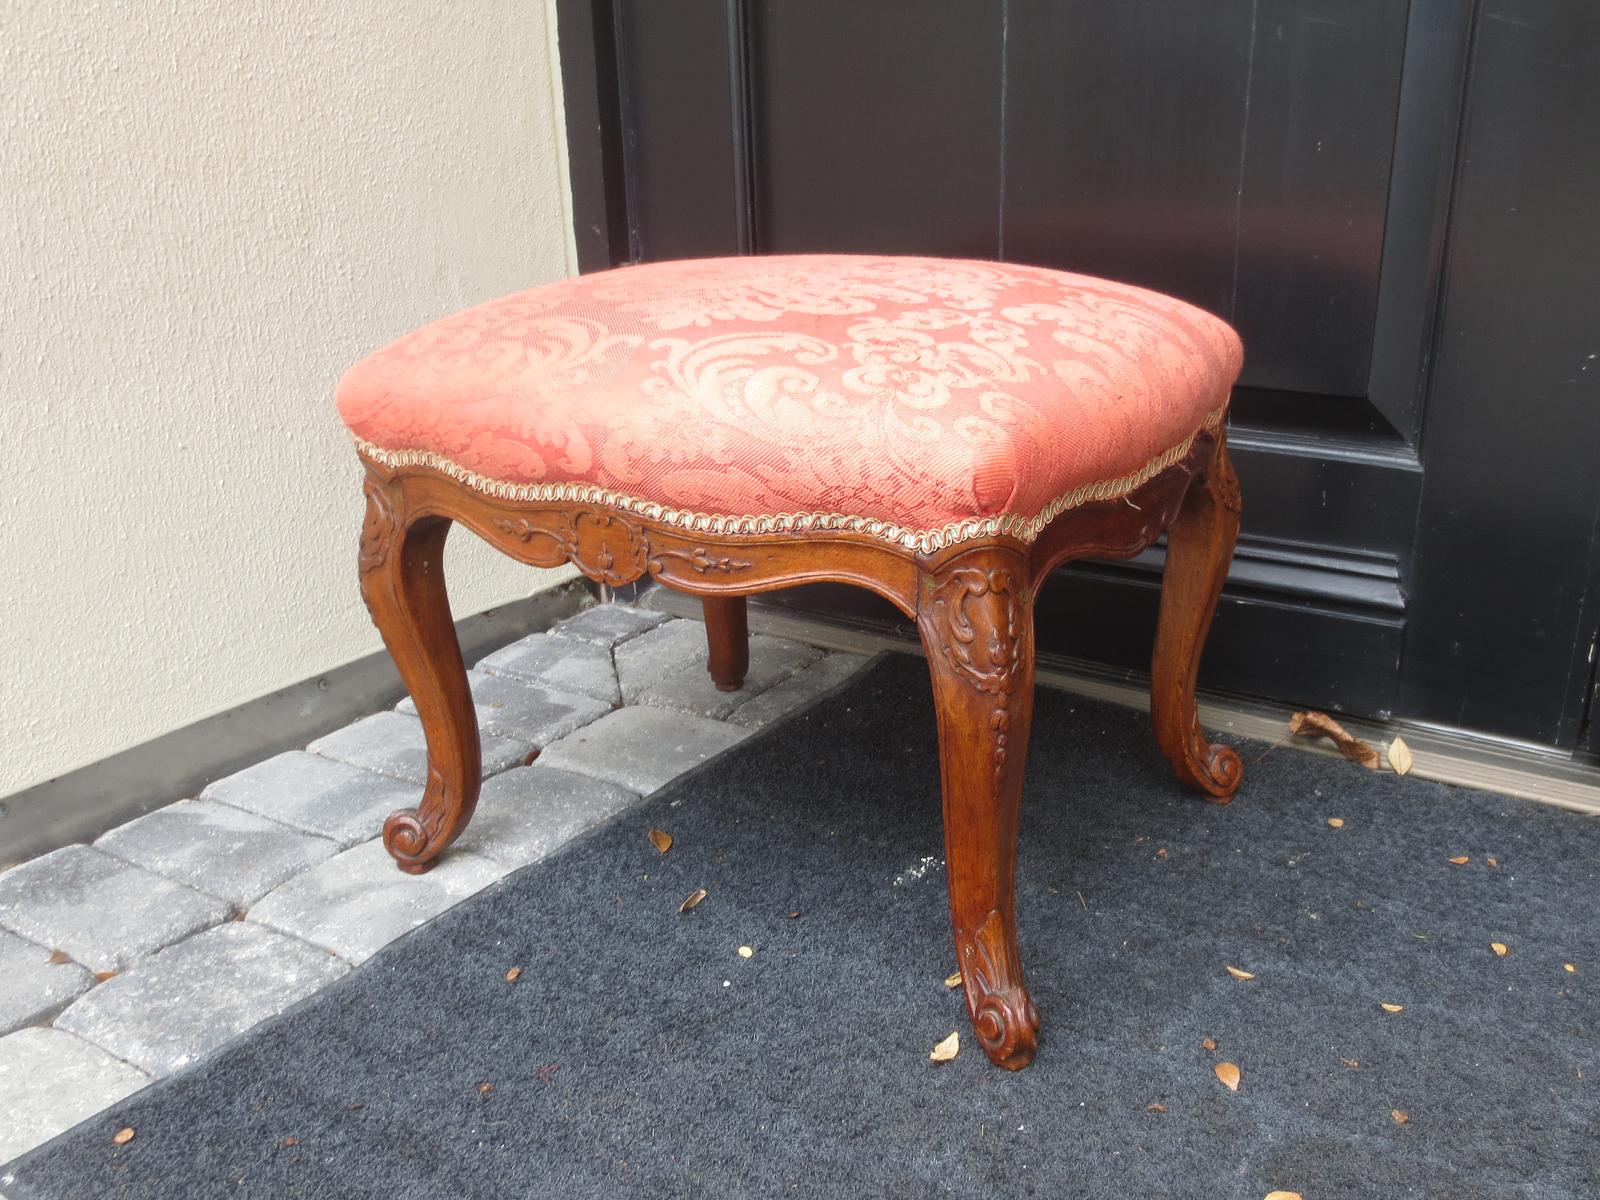 18th-19th century French stool / bench / Tabouret.